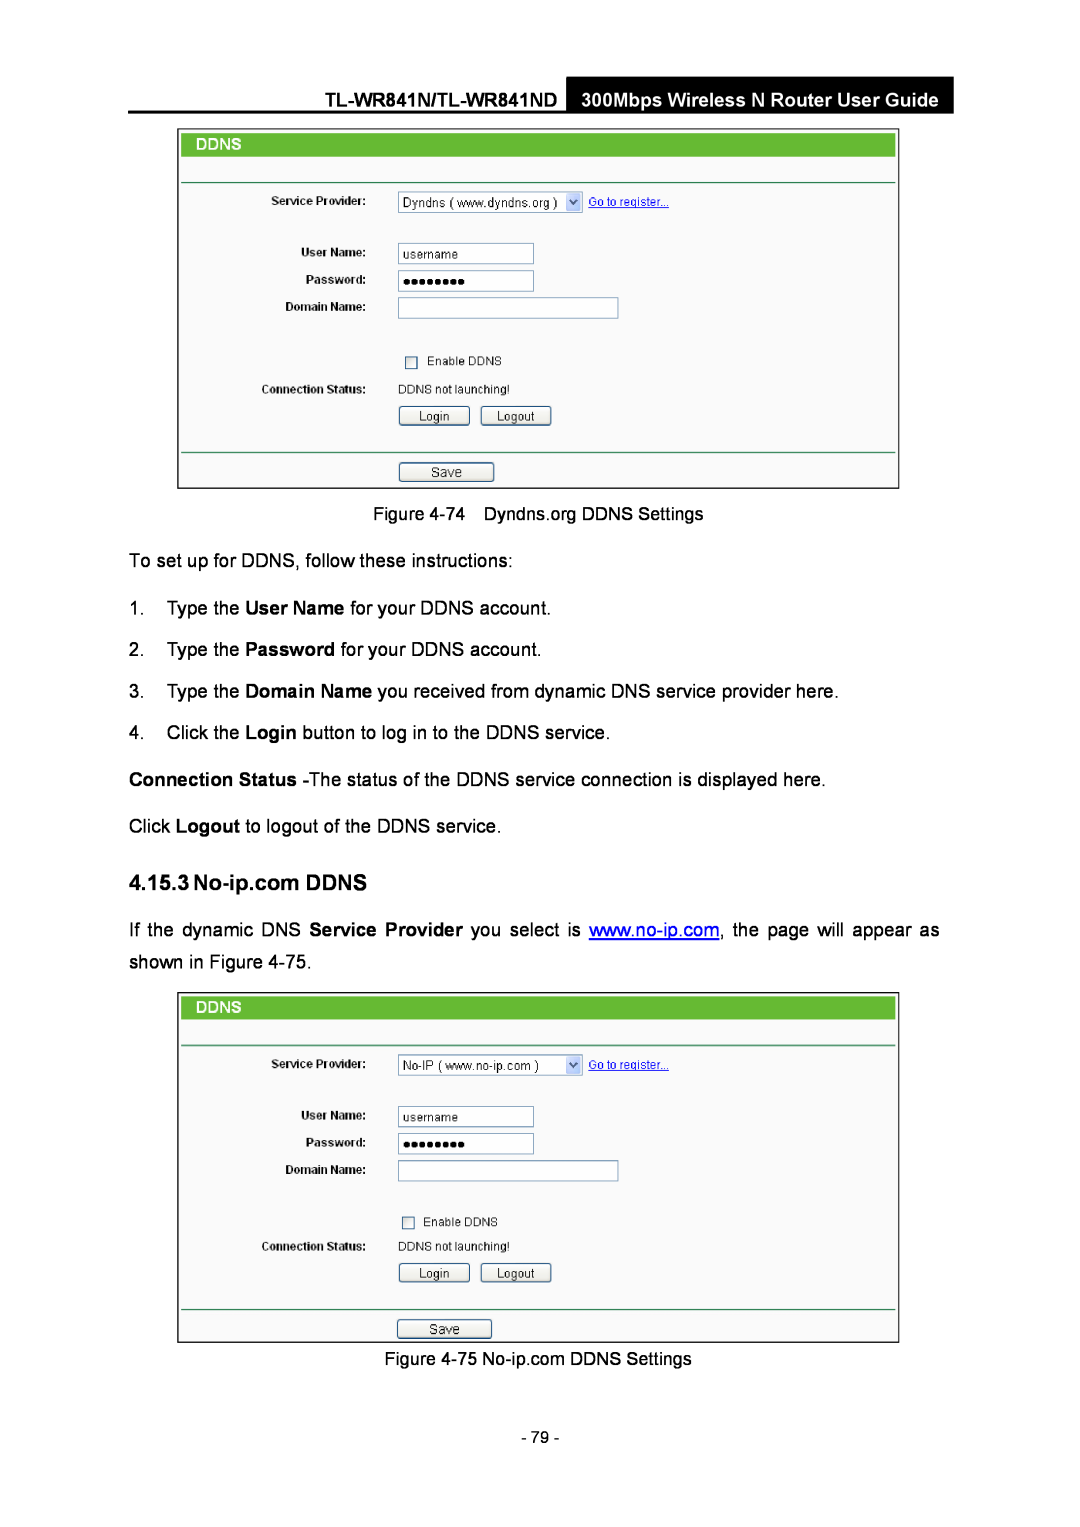 TP-Link manual No-ip.com DDNS, TL-WR841N/TL-WR841ND 300Mbps Wireless N Router User Guide, 74 Dyndns.org DDNS Settings 